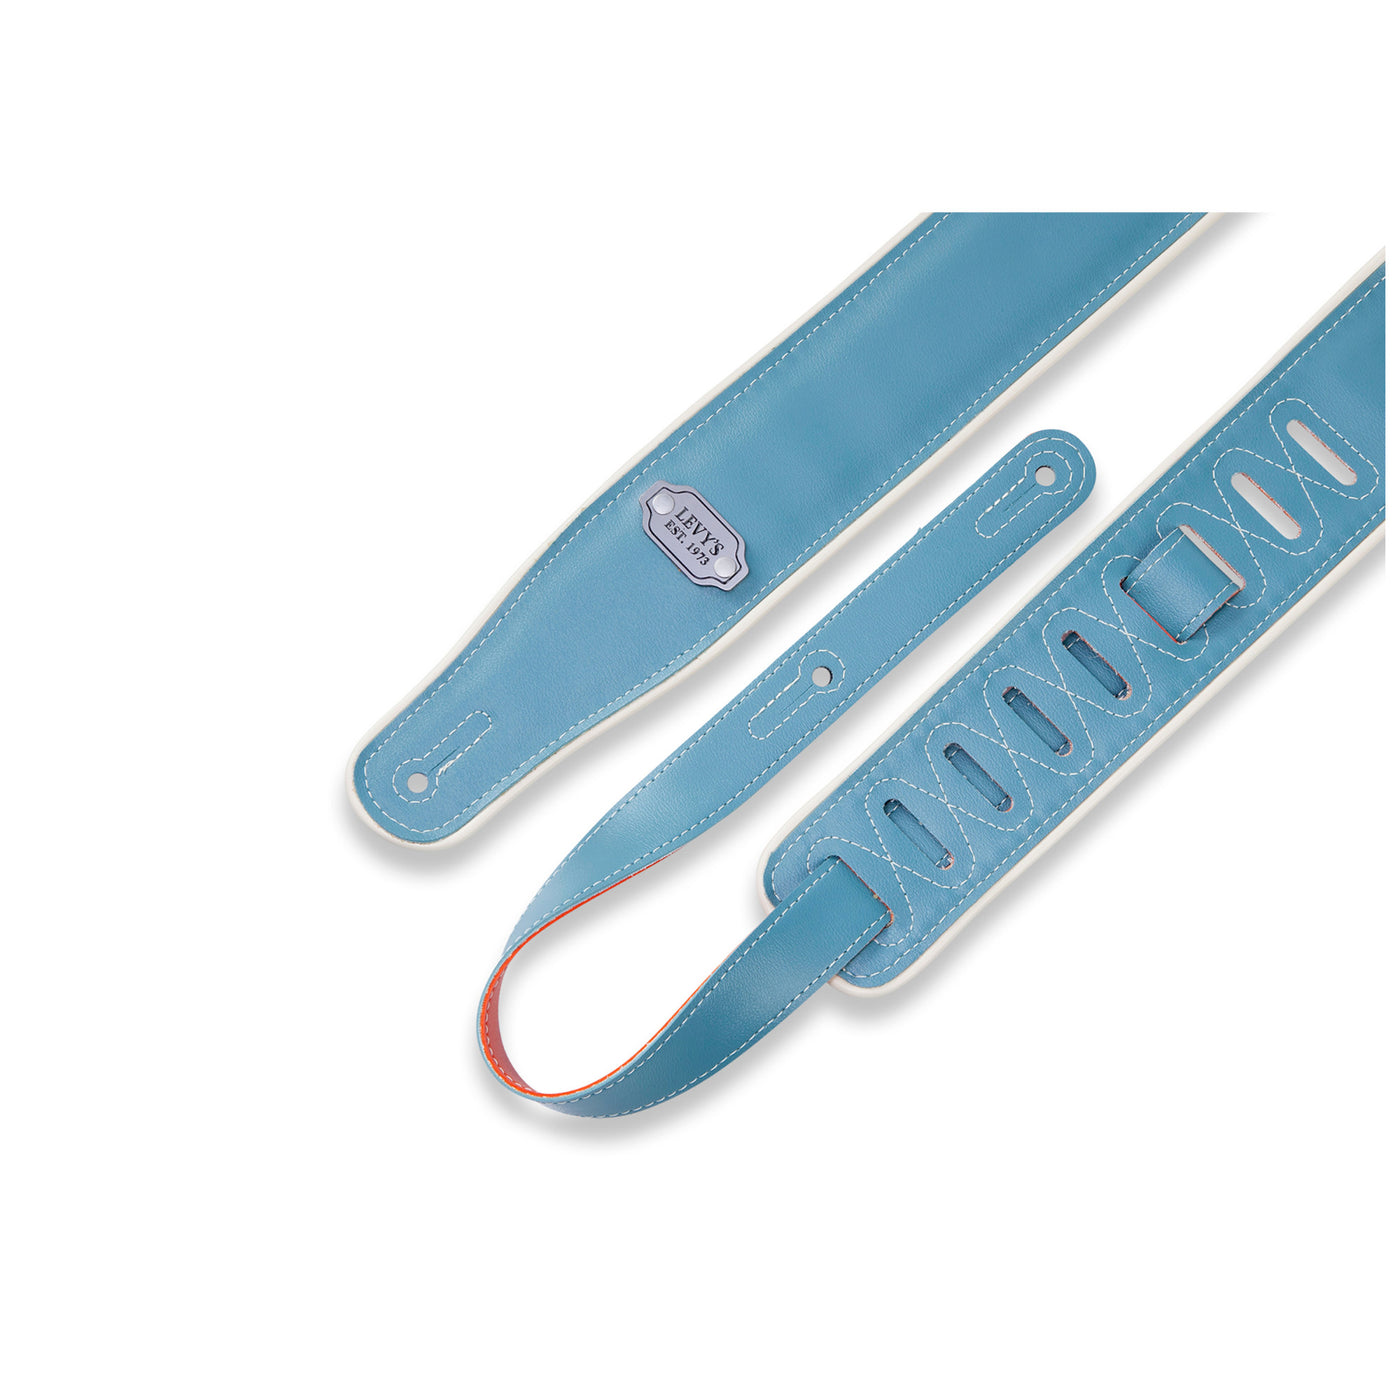 Levy's 2.75" Reversible Vinyl Strap in Orange and Teal